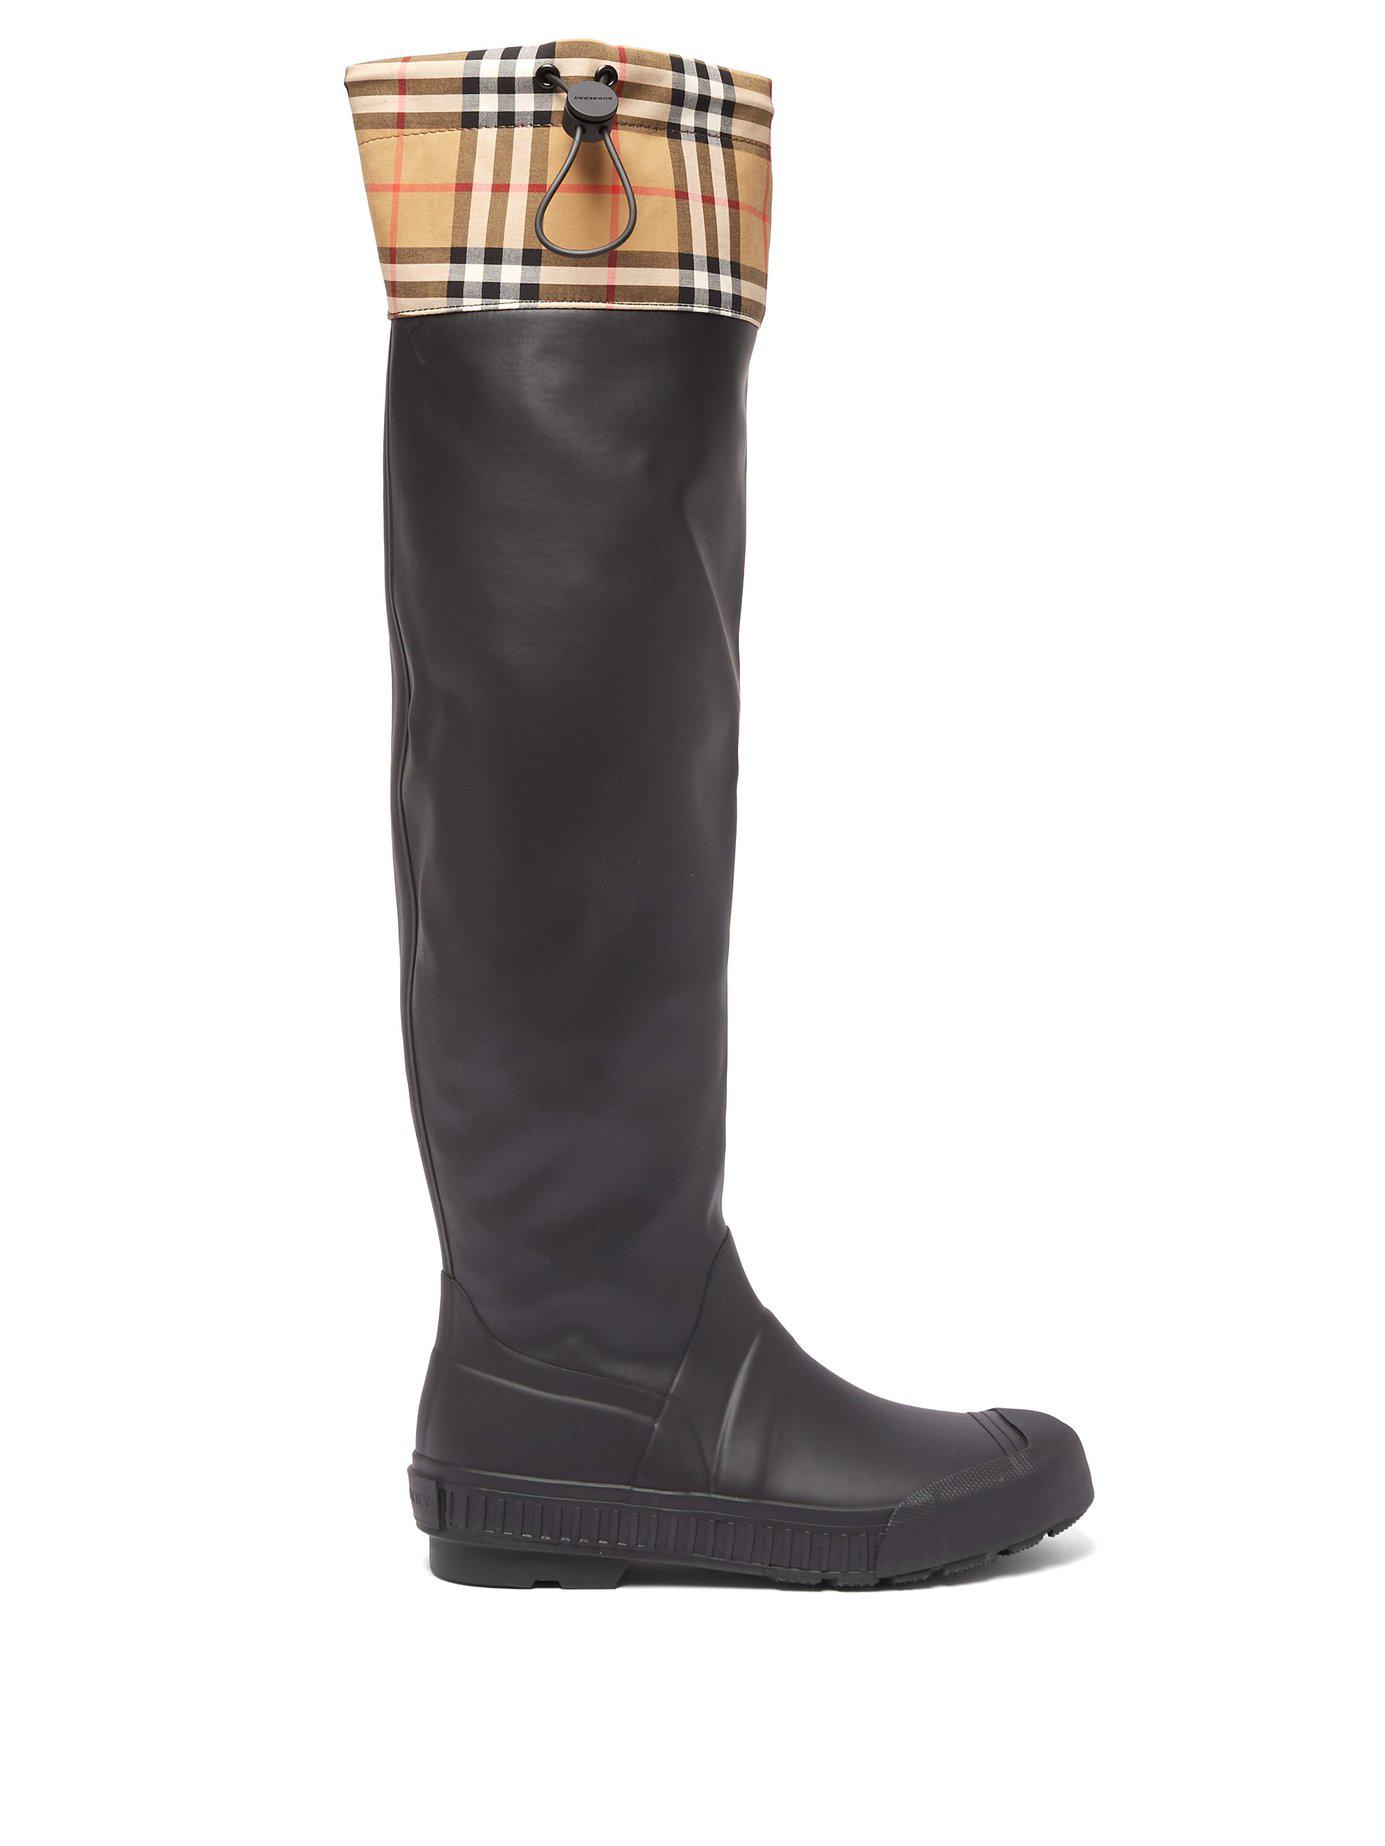 Burberry Check And Rubber Boots in Black Beige (Black) - Lyst